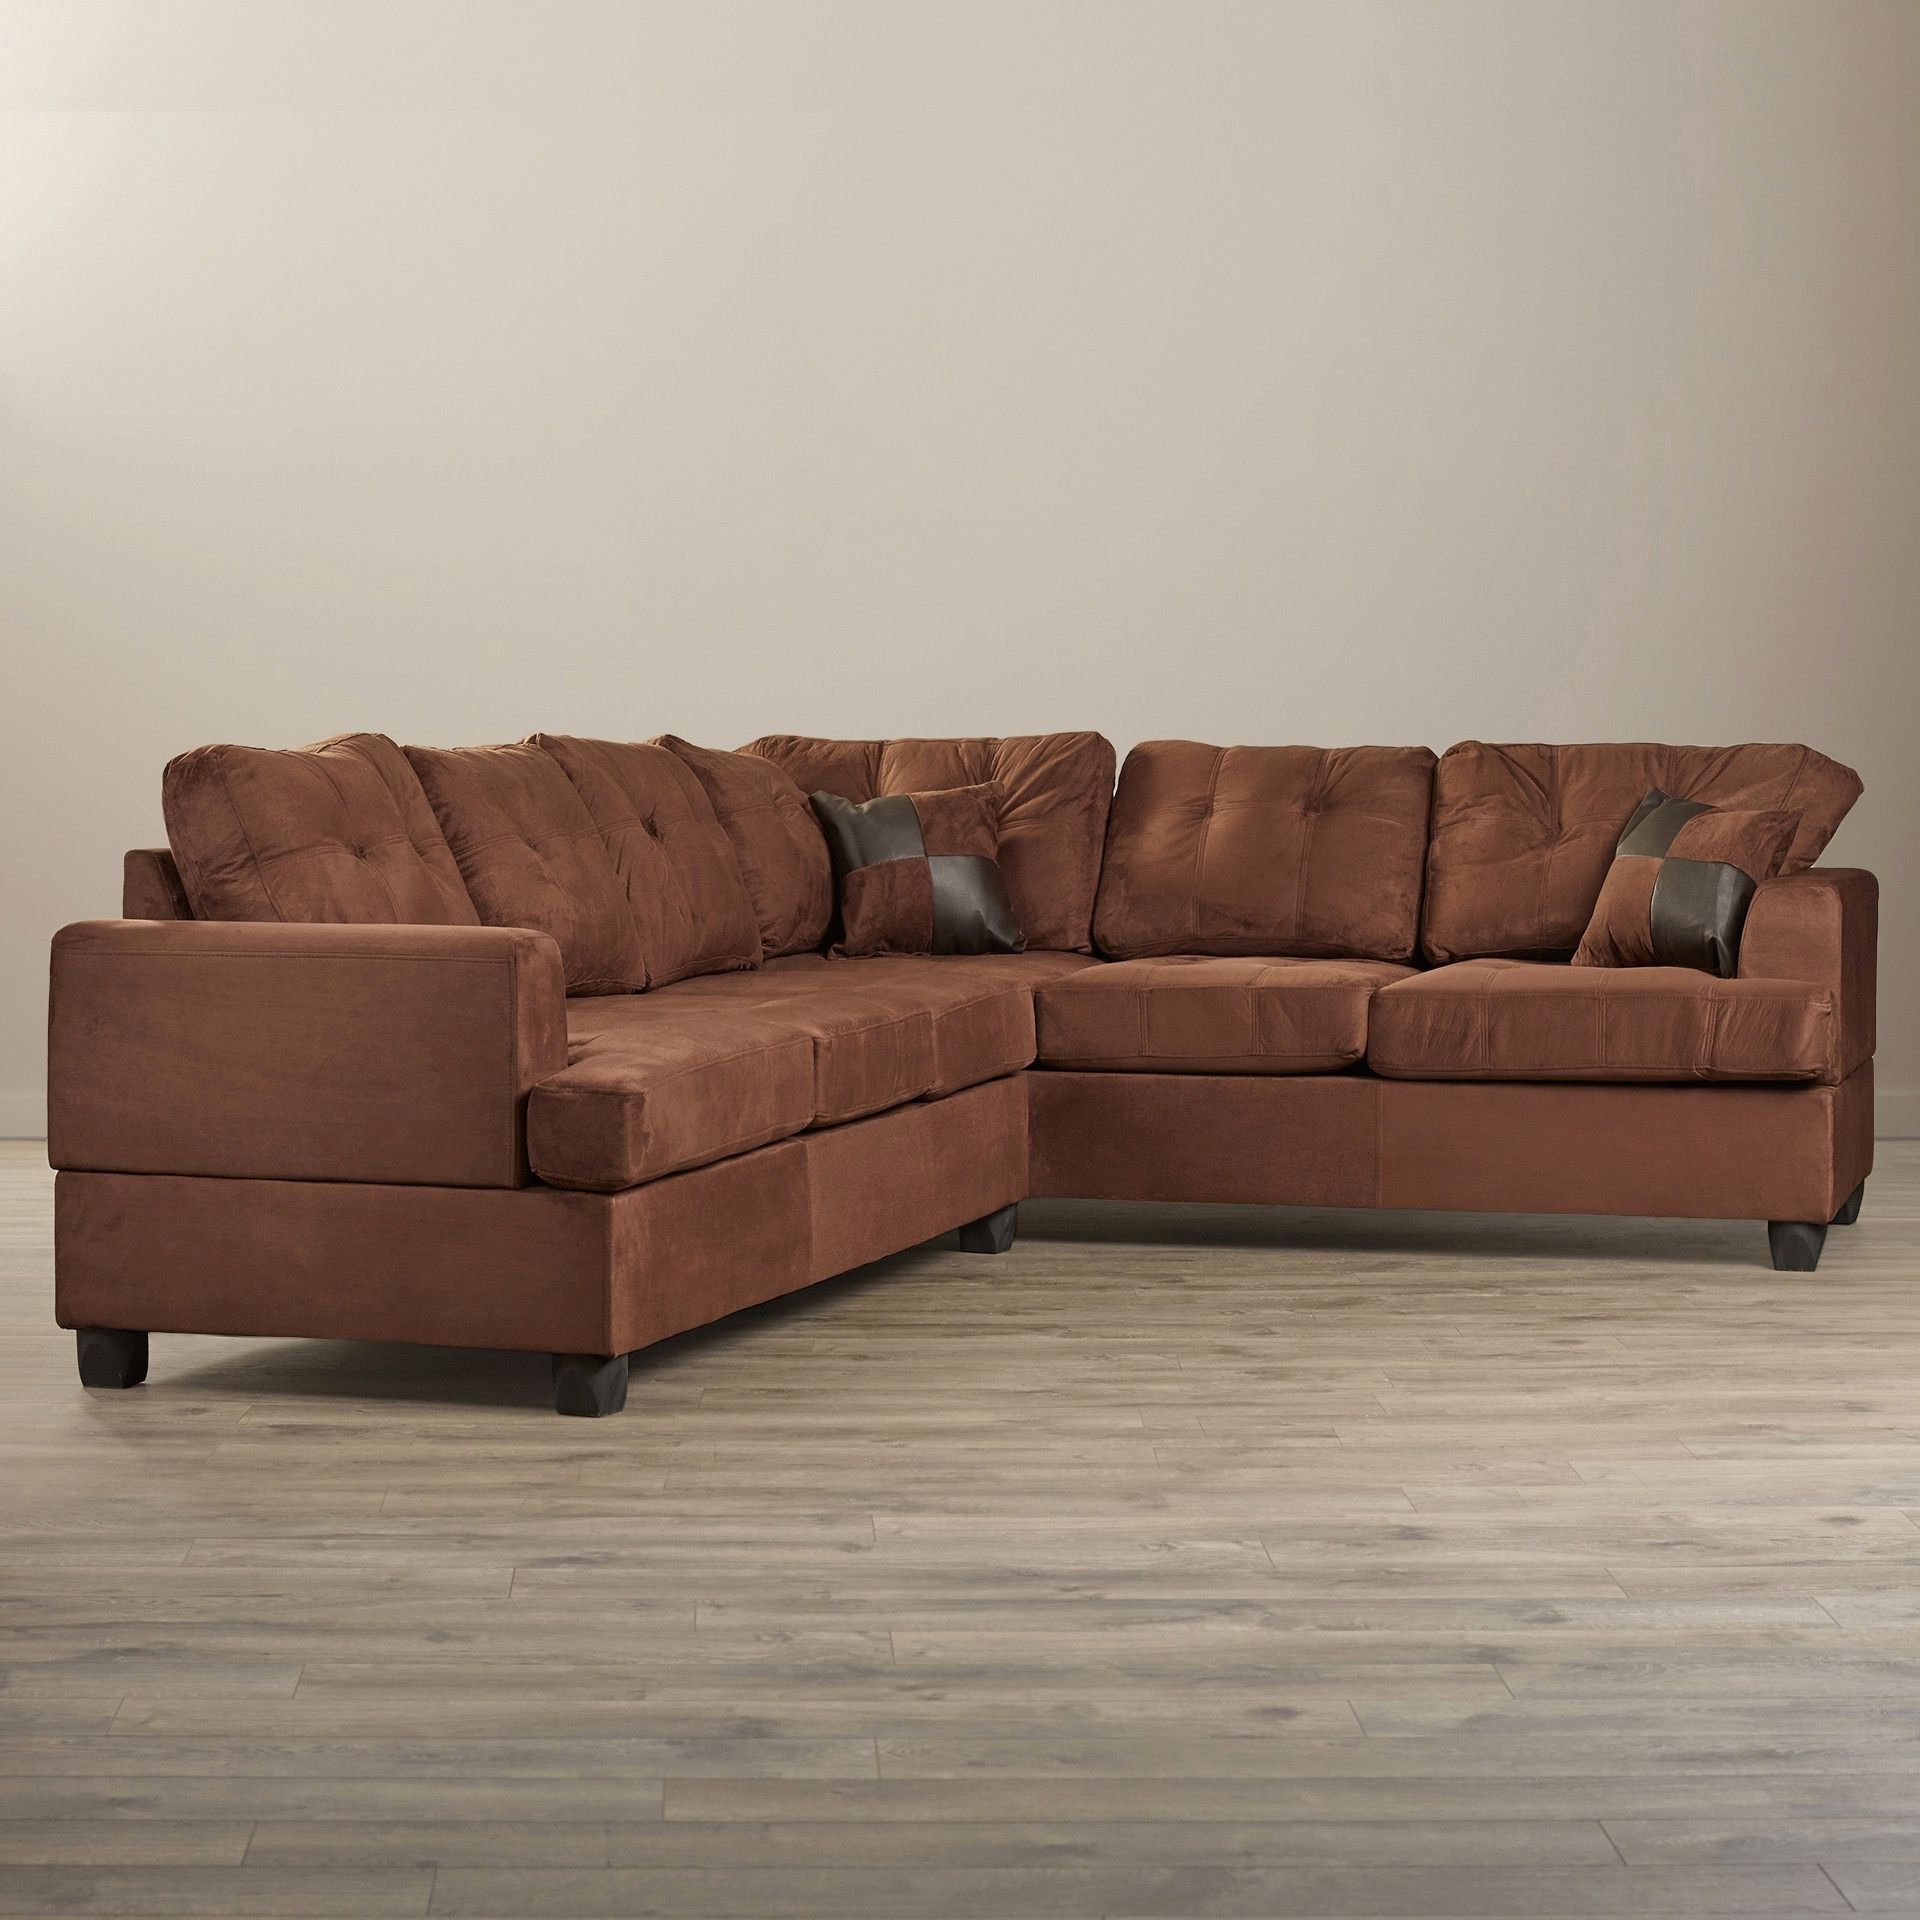 New Cheap Sofa Shops 2018 – Couches And Sofas Ideas Pertaining To Popular Sectional Sofas At Sears (View 12 of 15)